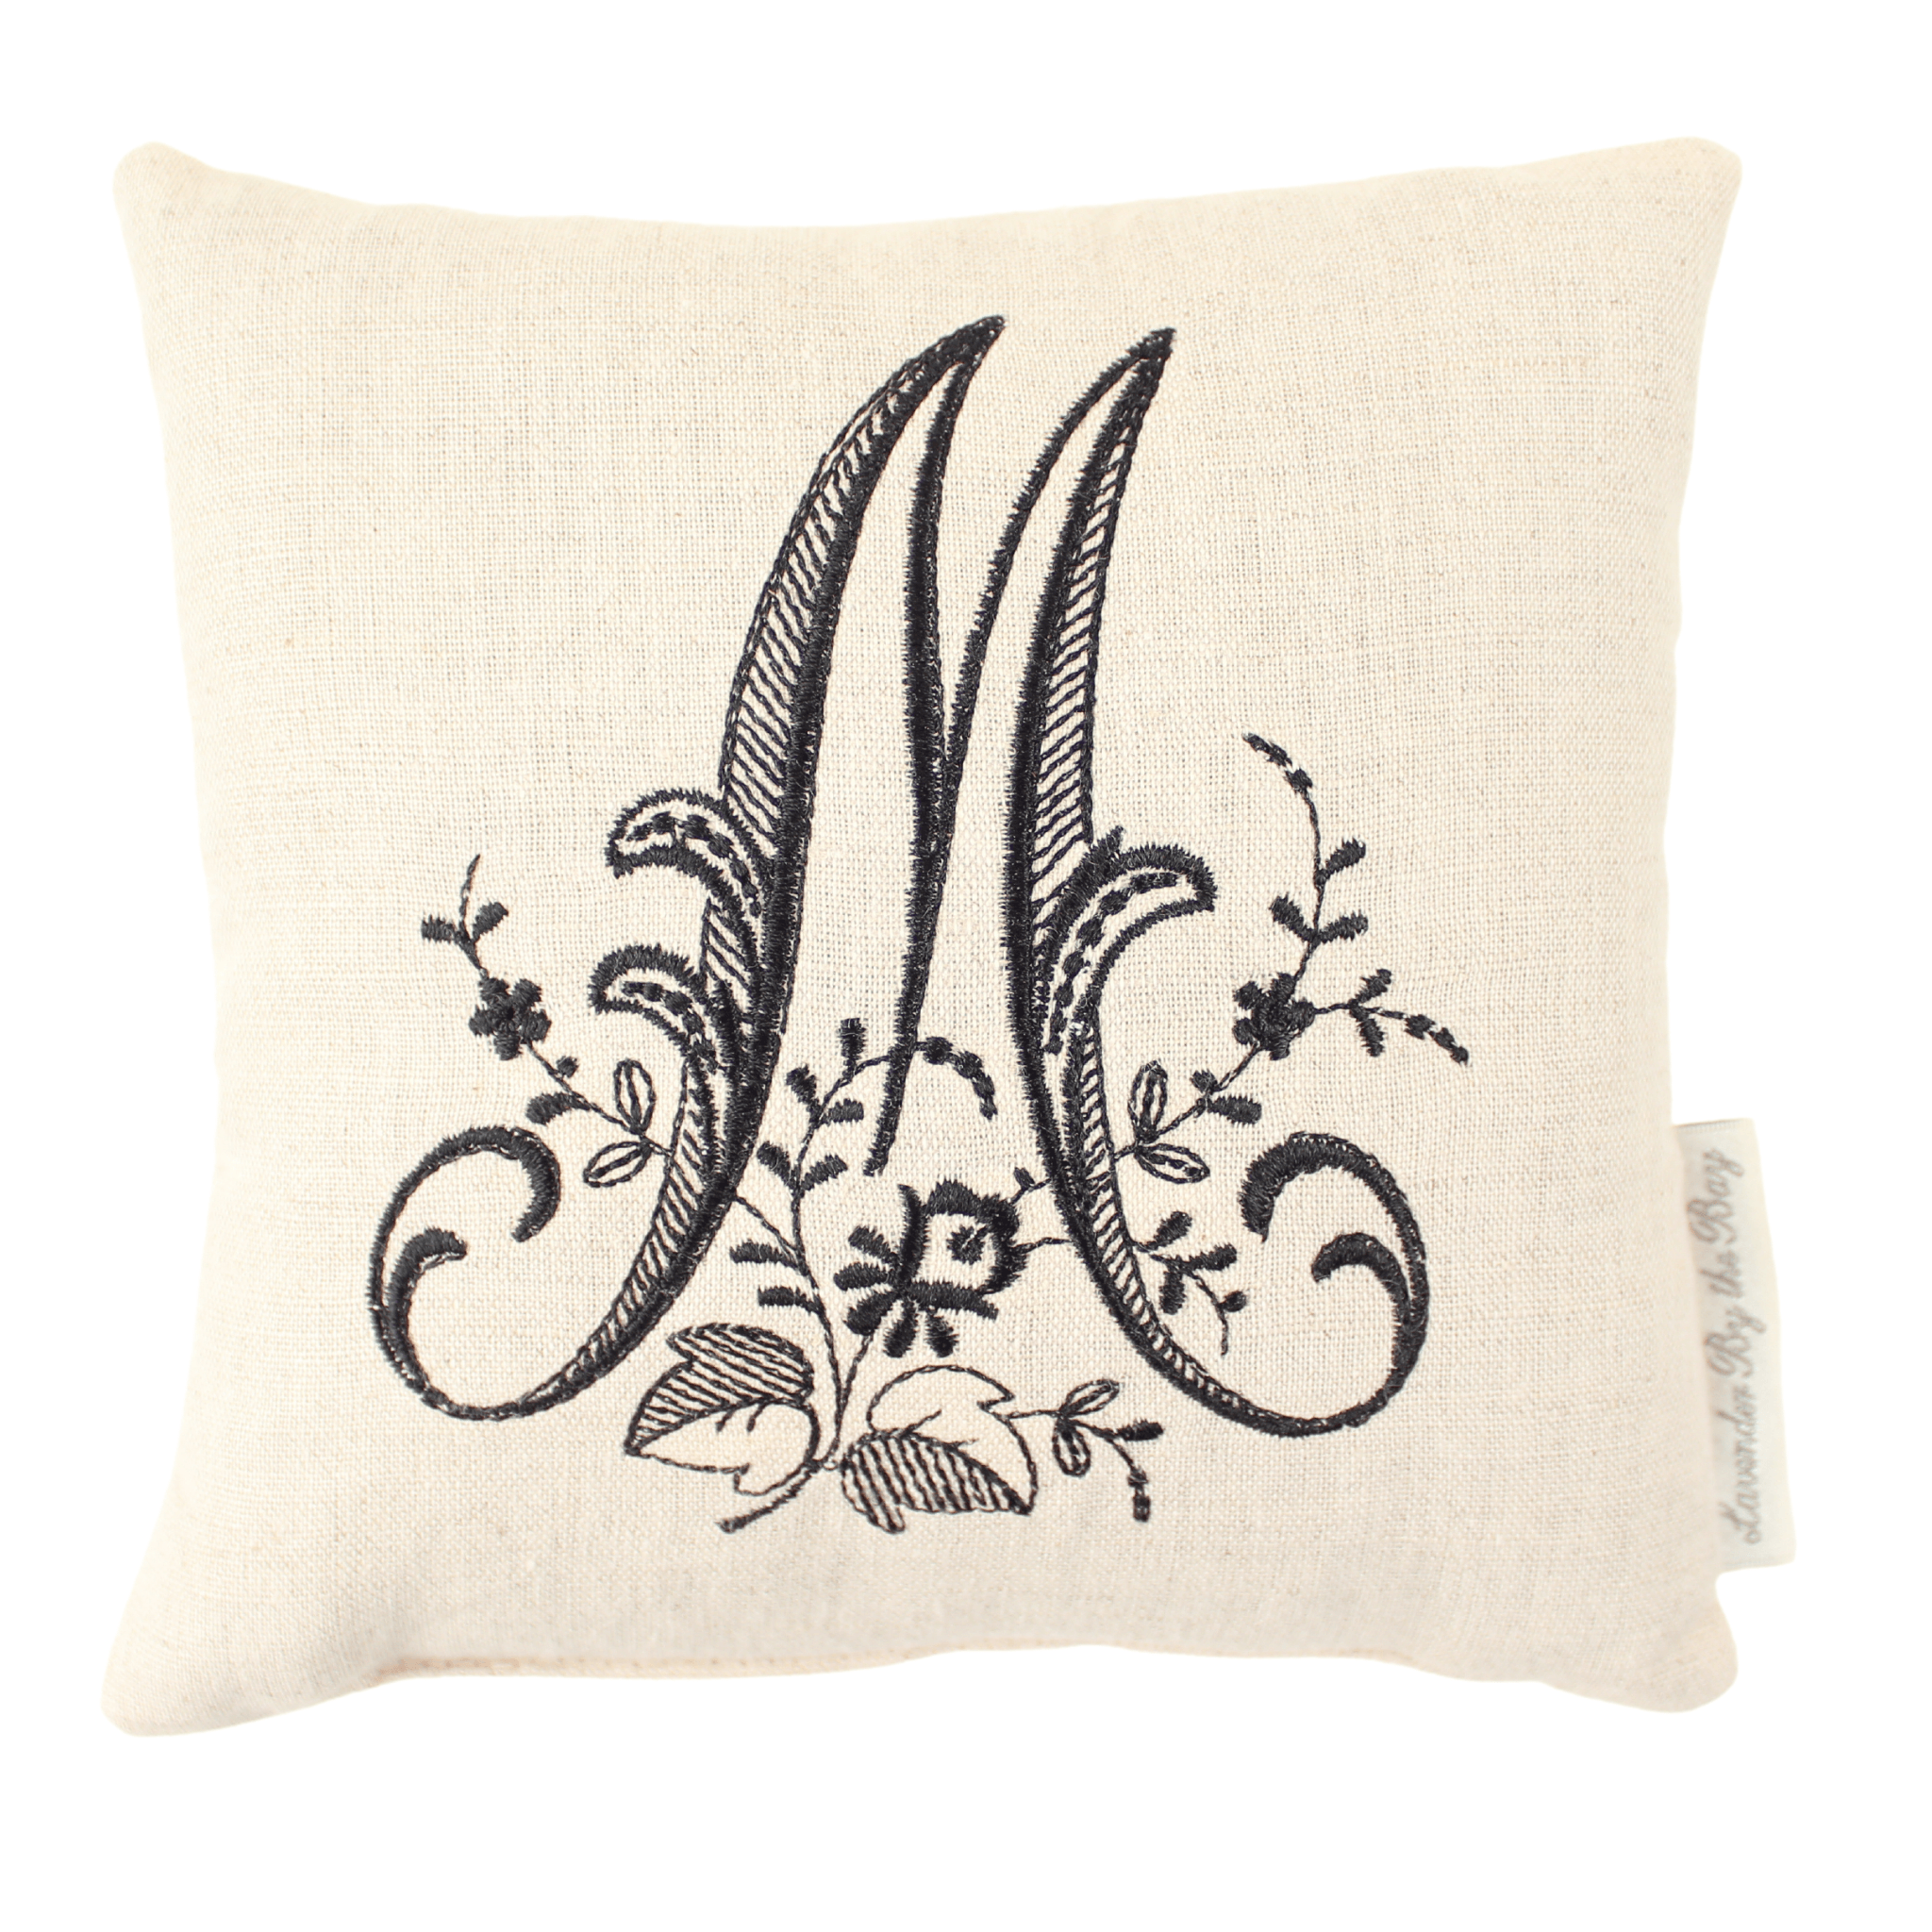 Large Monogram Applique Pillow Cover-embroidered